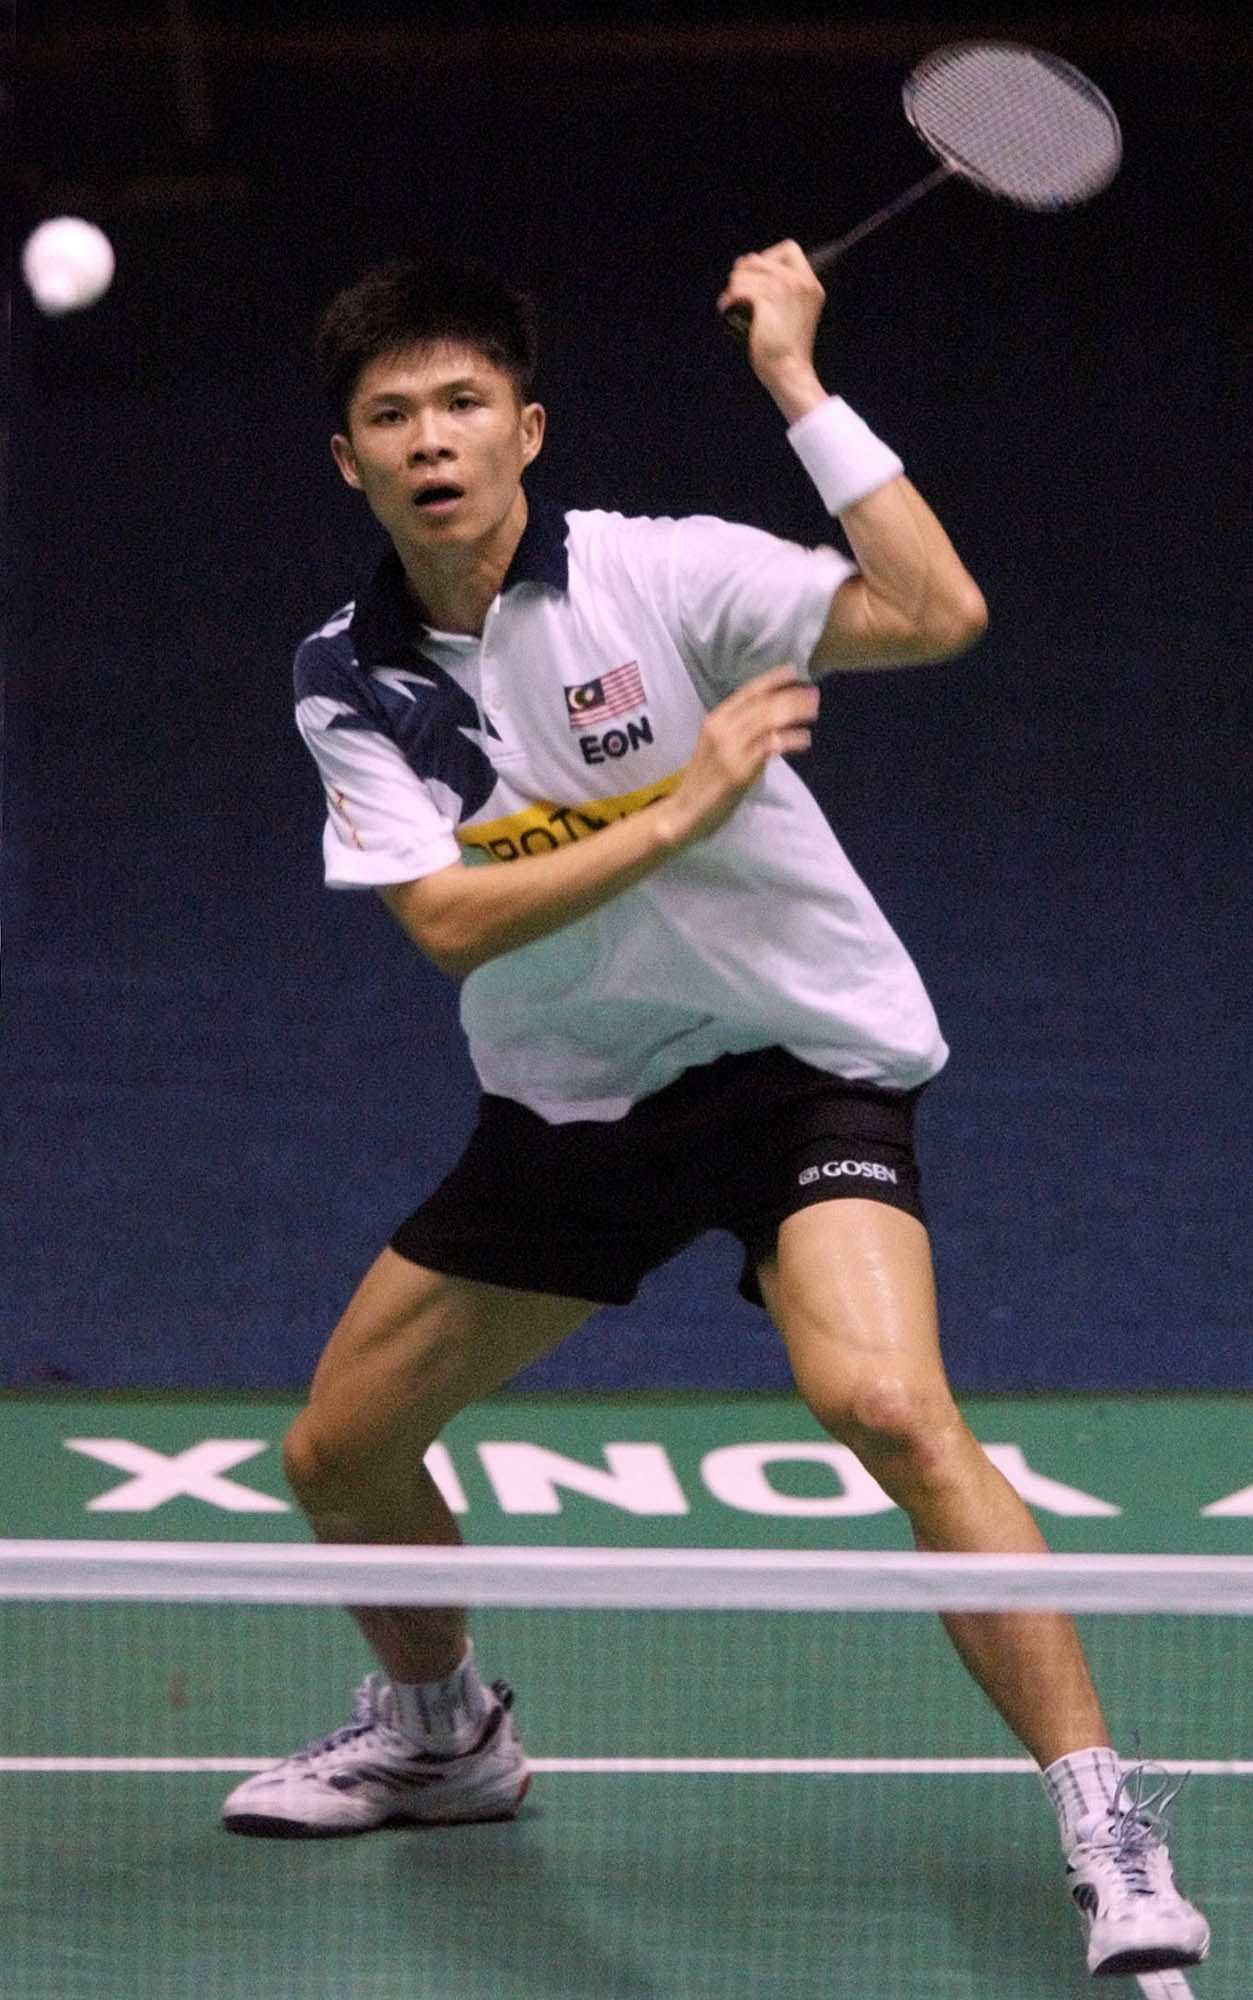 Malaysian shuttler Wong Choong Hann plays a shot against China’s Li Yu during the second round of the China Open badminton tournament in Guangzhou, on November 10, 2004. Photo: AP